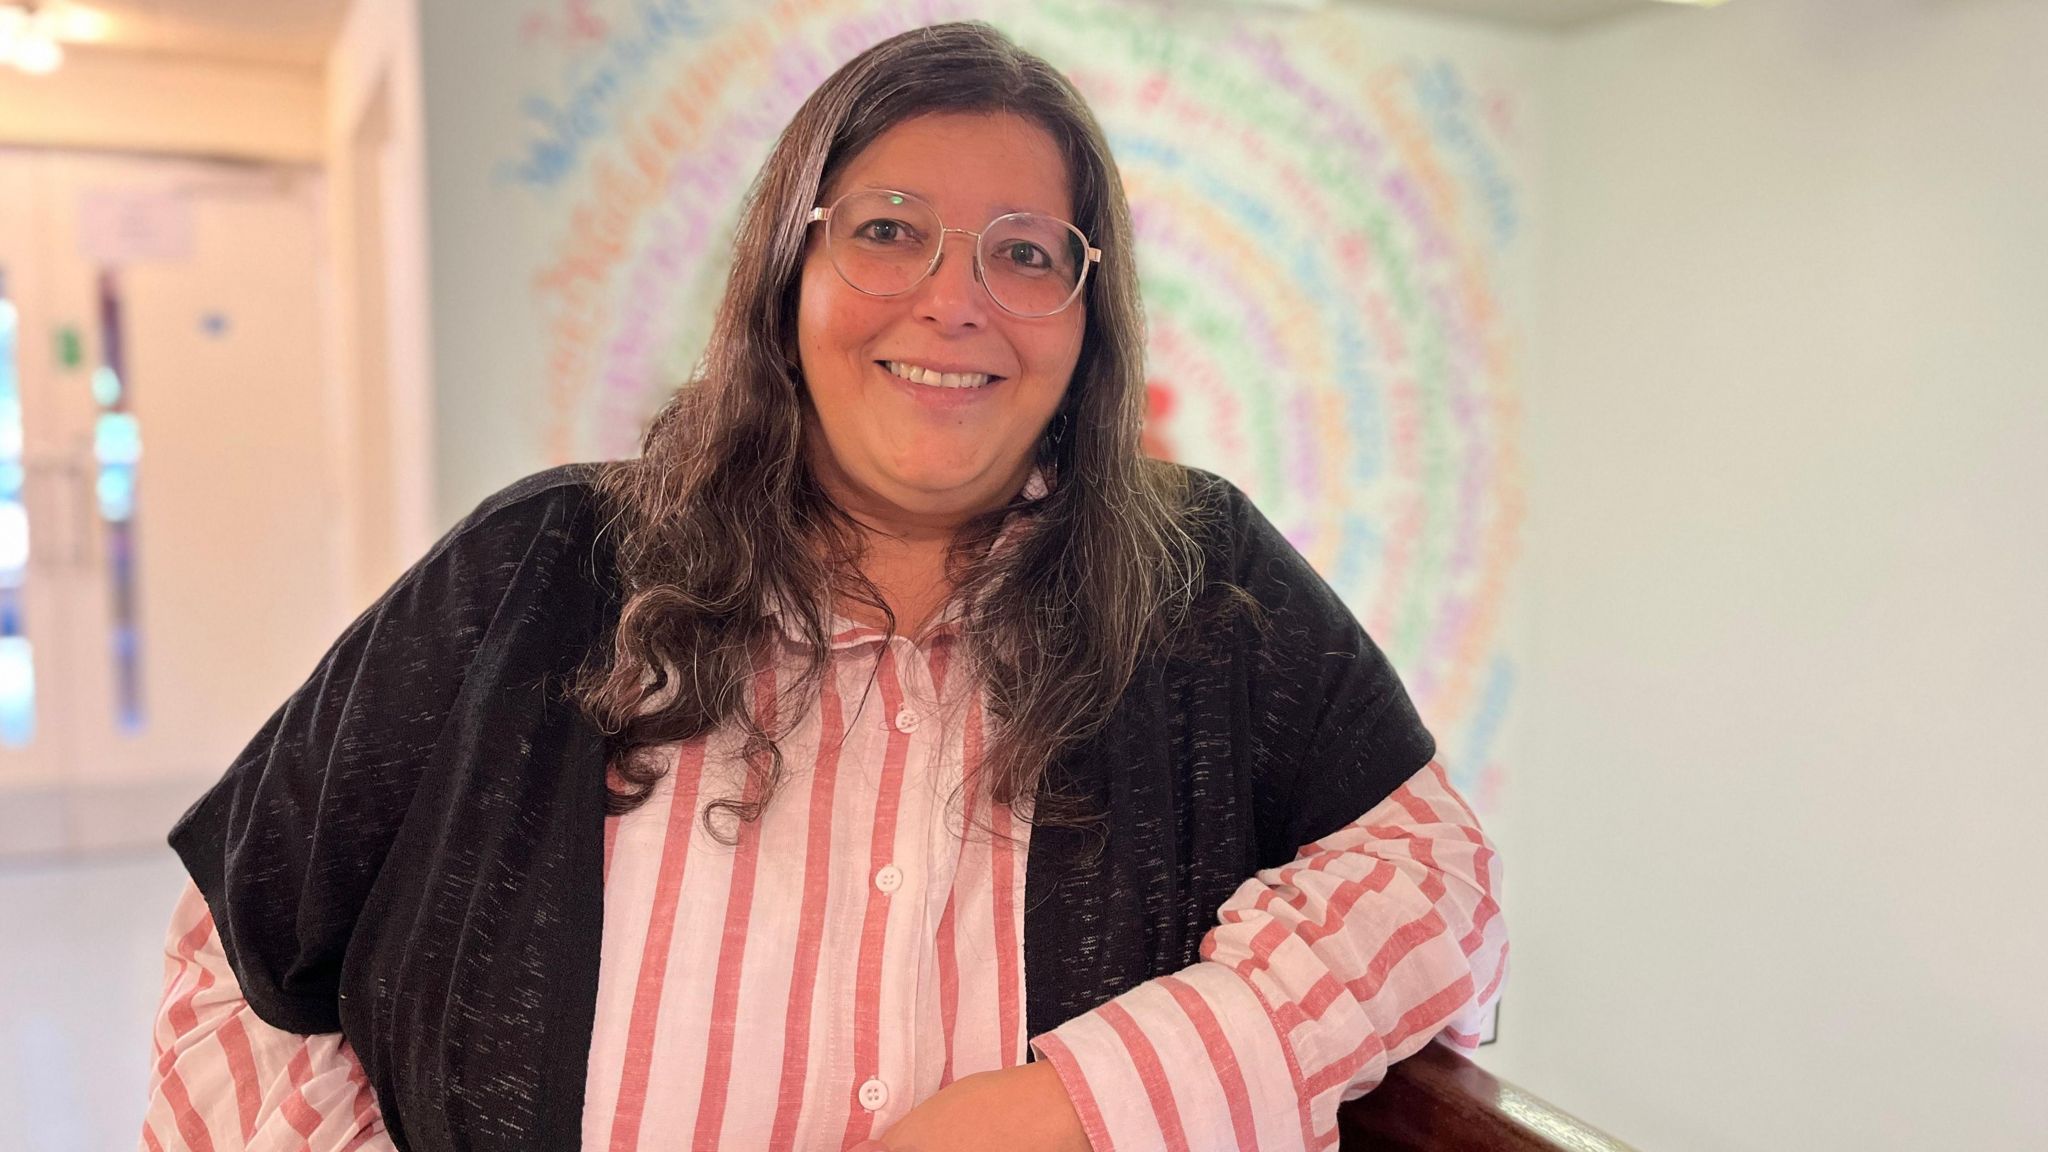 Maria Wilby wears a black shawl over a pink and white striped shirt, standing in front of an artwork designed by a refugee